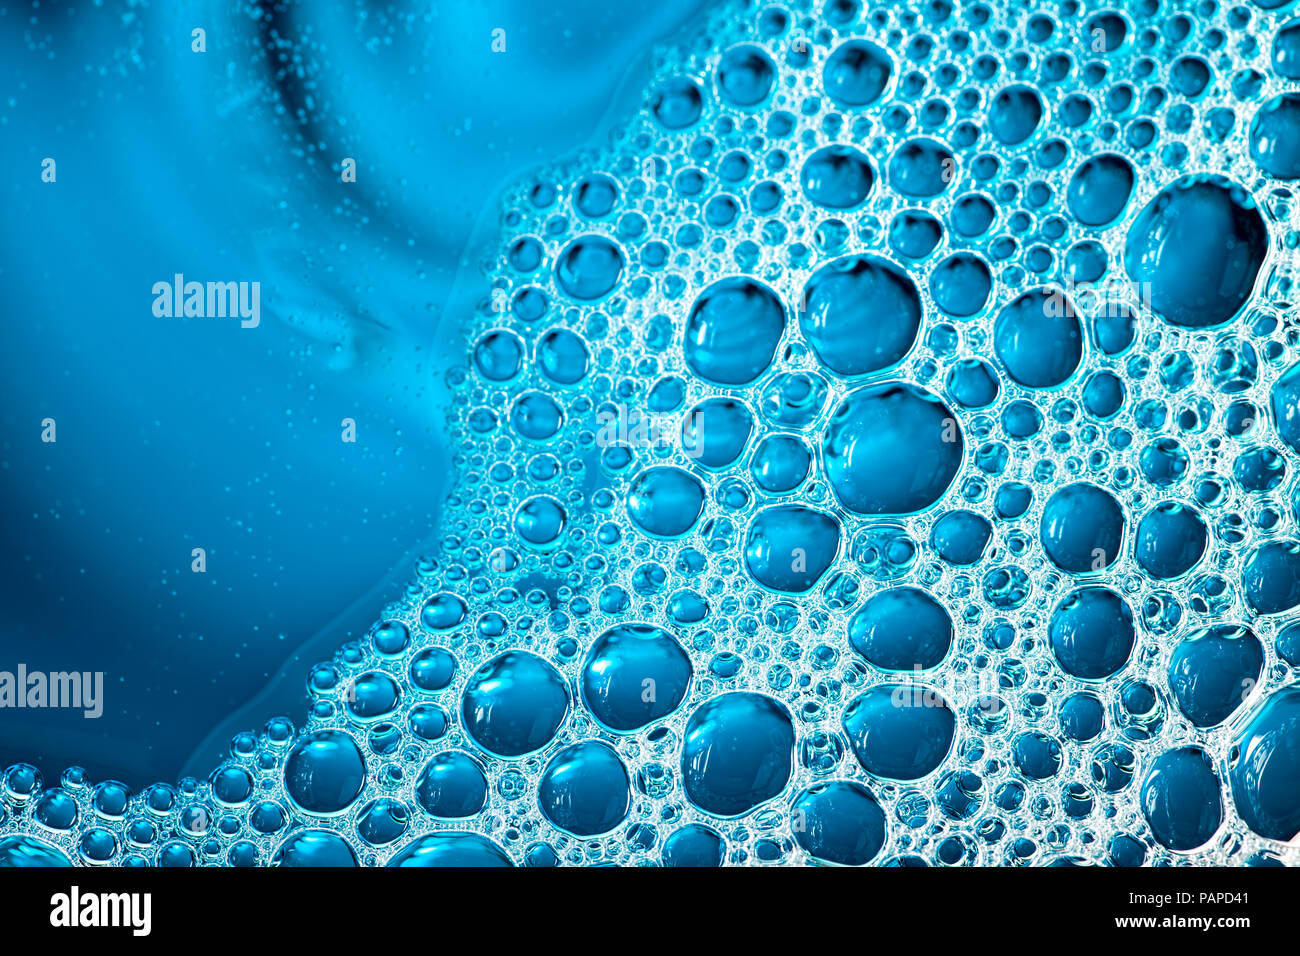 Blue bubbles. Selective focus aesthetic liquid background image. Abstract chaotic pattern of surface tension bubble froth in macro close-up. Stock Photo